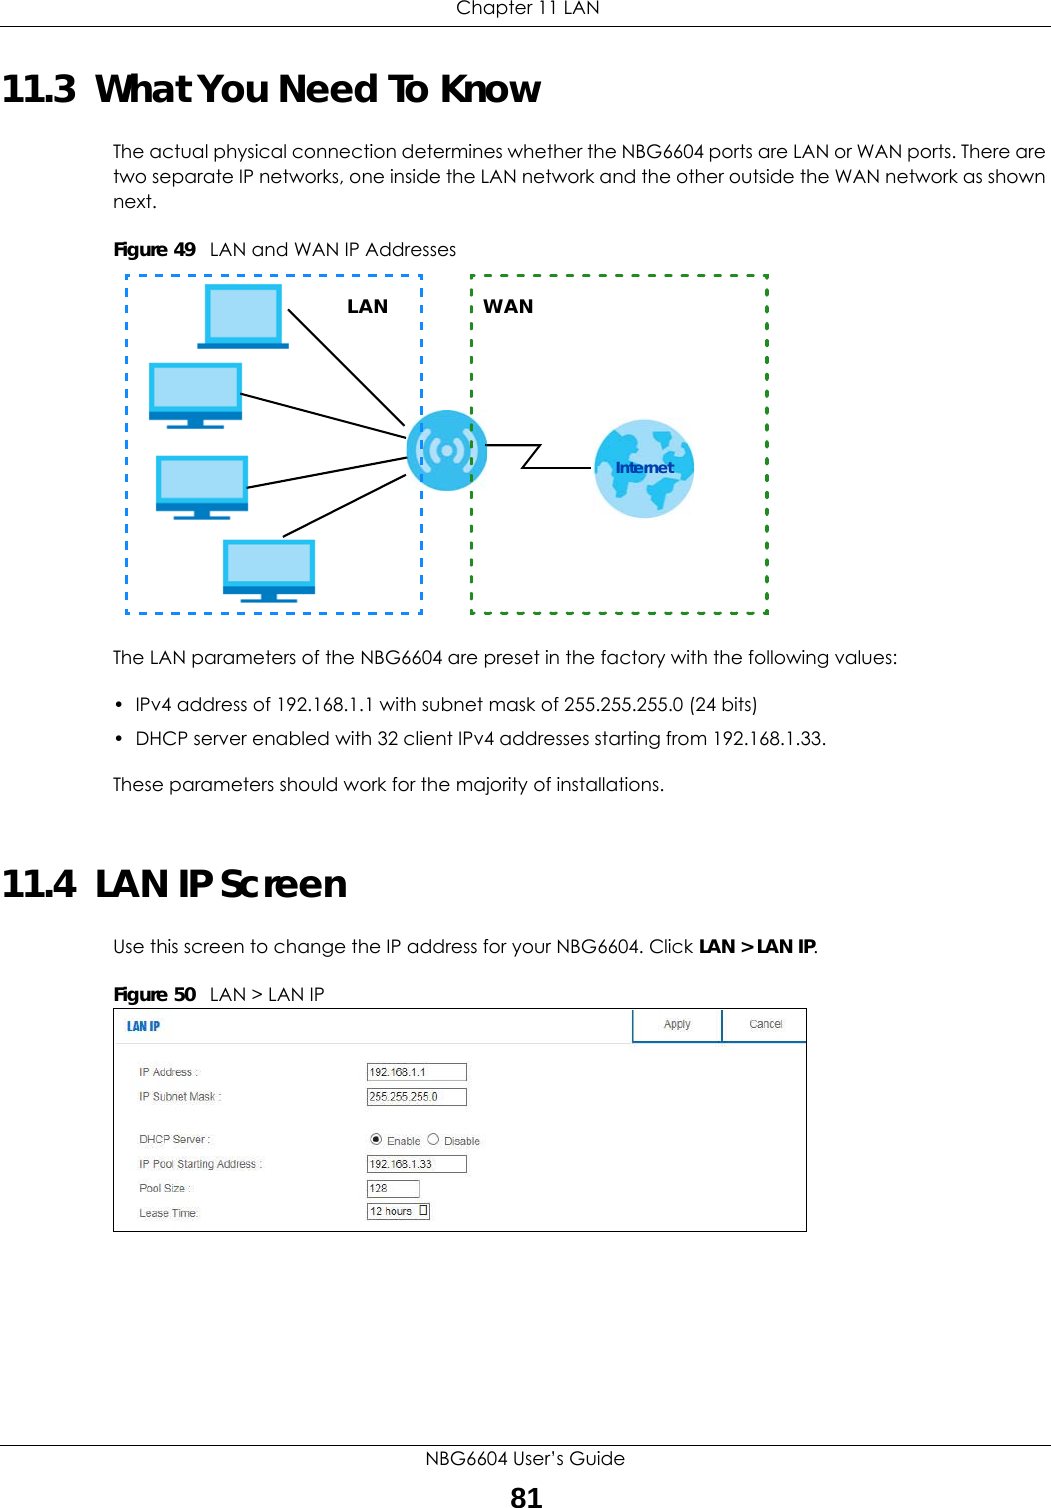  Chapter 11 LANNBG6604 User’s Guide8111.3  What You Need To KnowThe actual physical connection determines whether the NBG6604 ports are LAN or WAN ports. There are two separate IP networks, one inside the LAN network and the other outside the WAN network as shown next.Figure 49   LAN and WAN IP AddressesThe LAN parameters of the NBG6604 are preset in the factory with the following values:• IPv4 address of 192.168.1.1 with subnet mask of 255.255.255.0 (24 bits)• DHCP server enabled with 32 client IPv4 addresses starting from 192.168.1.33. These parameters should work for the majority of installations.11.4  LAN IP ScreenUse this screen to change the IP address for your NBG6604. Click LAN &gt; LAN IP.Figure 50   LAN &gt; LAN IP LAN WANInternet